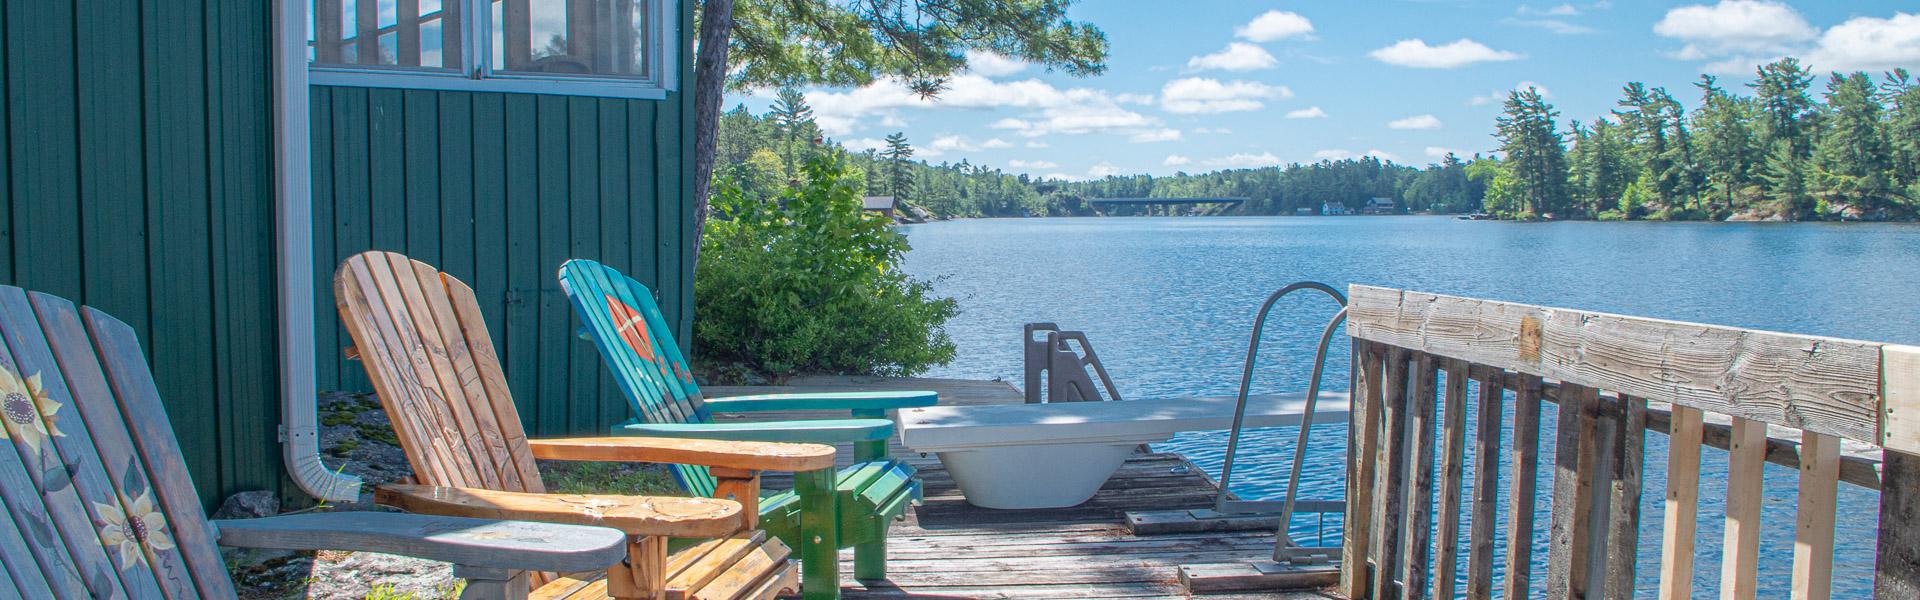 Affordable waterfront cottage rentals in Ontario